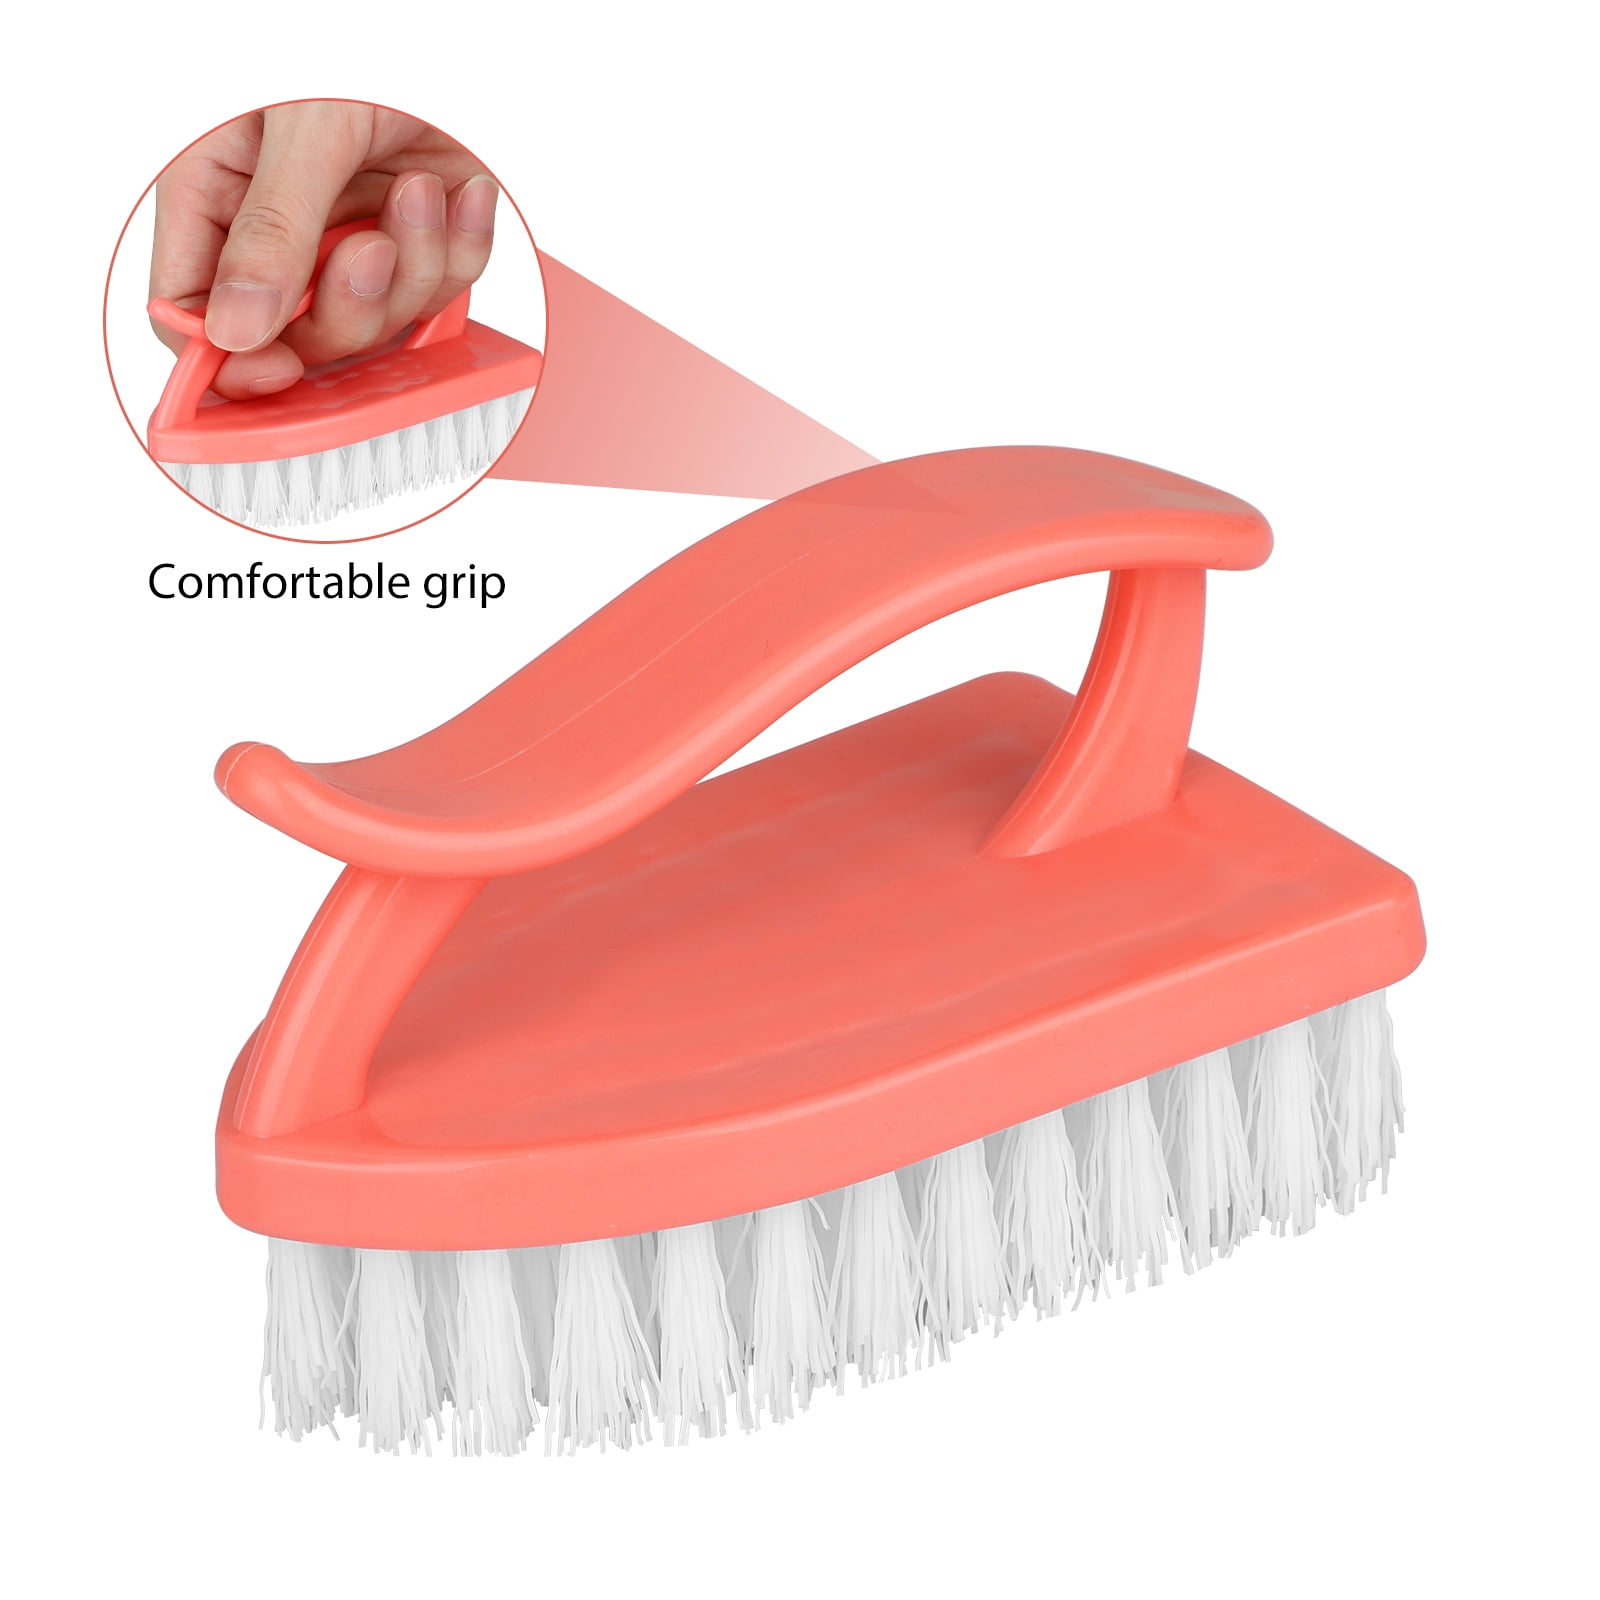 1pc Crevice Brush Plastic Washing Brush Multifunctional Foot Shaping Cleaning  Brush Cleaning Tools - Price history & Review, AliExpress Seller -  TAROOHOME Official Store